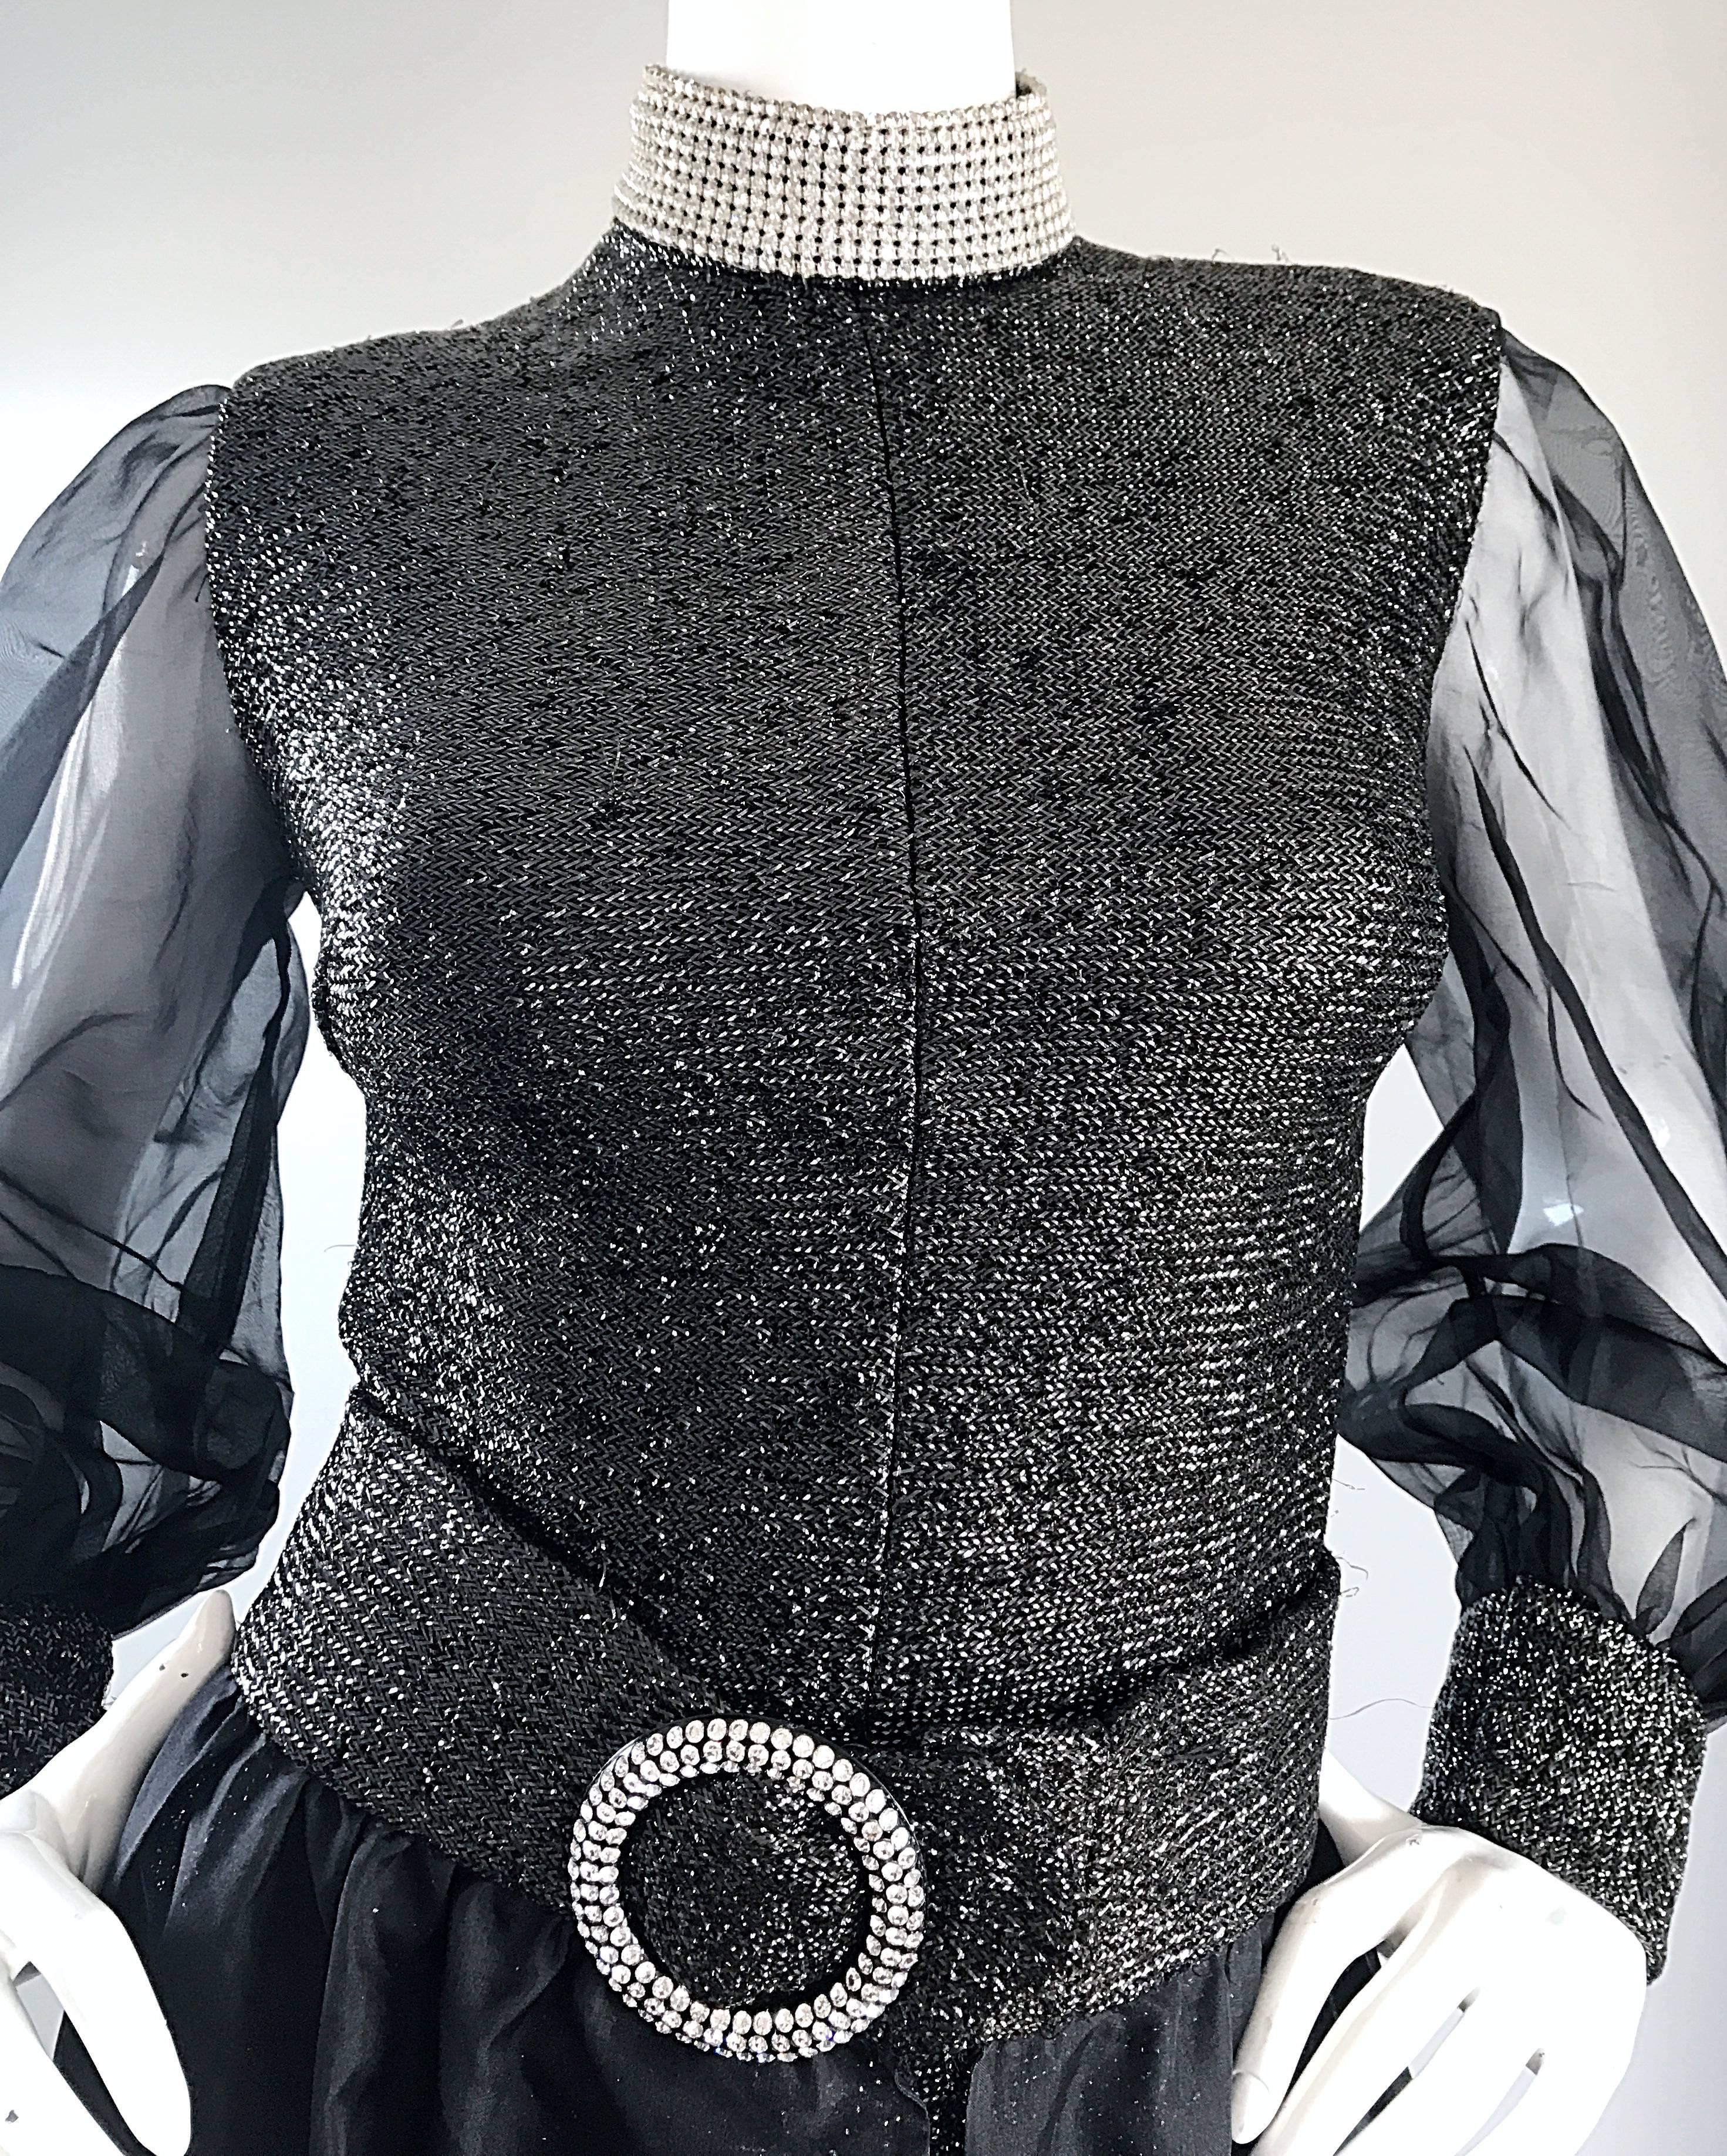 1970s Black Chiffon Lurex Rhinestone Disco Romper and Full Length Ball Skirt In Excellent Condition For Sale In San Diego, CA